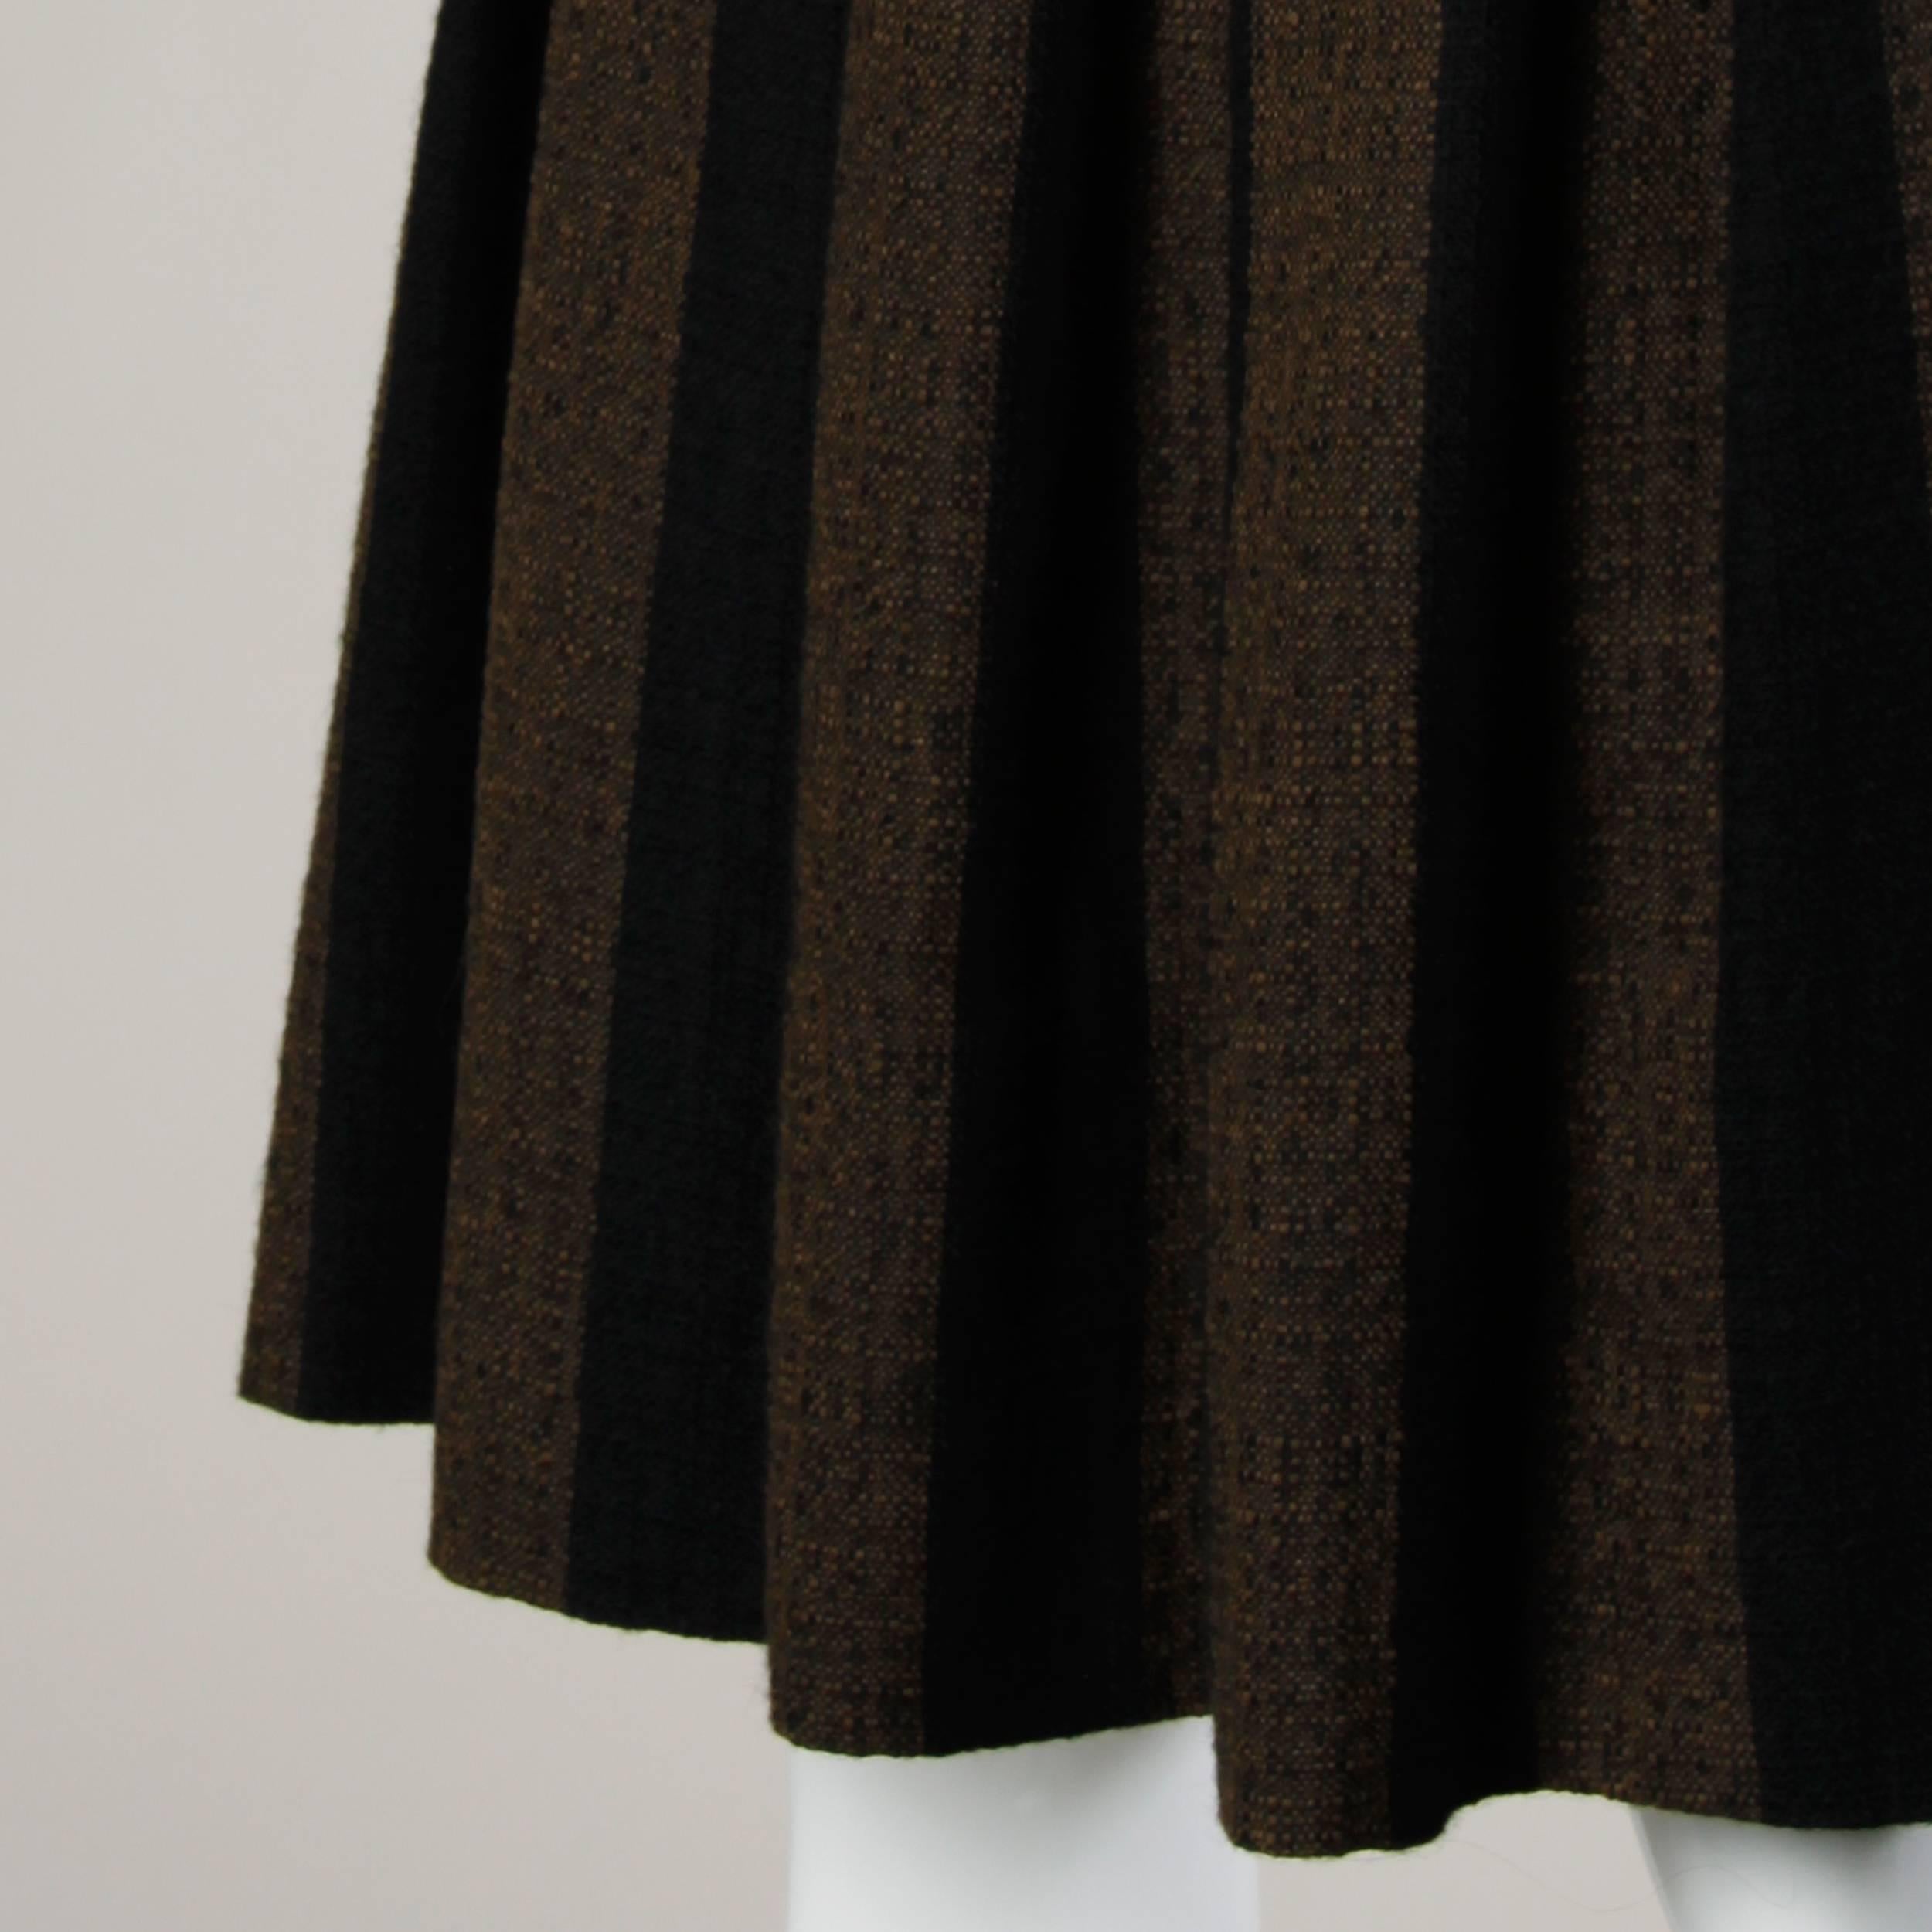 Vintage 1960s brown and black soft woven wool skirt with box pleats.

Details:

Unlined
Back Button and Back Metal Zip Closure
Marked Size: Not Marked
Estimated Size: XS
Color: Brown/ Black
Fabric: 100% Wool 
Label: Graff